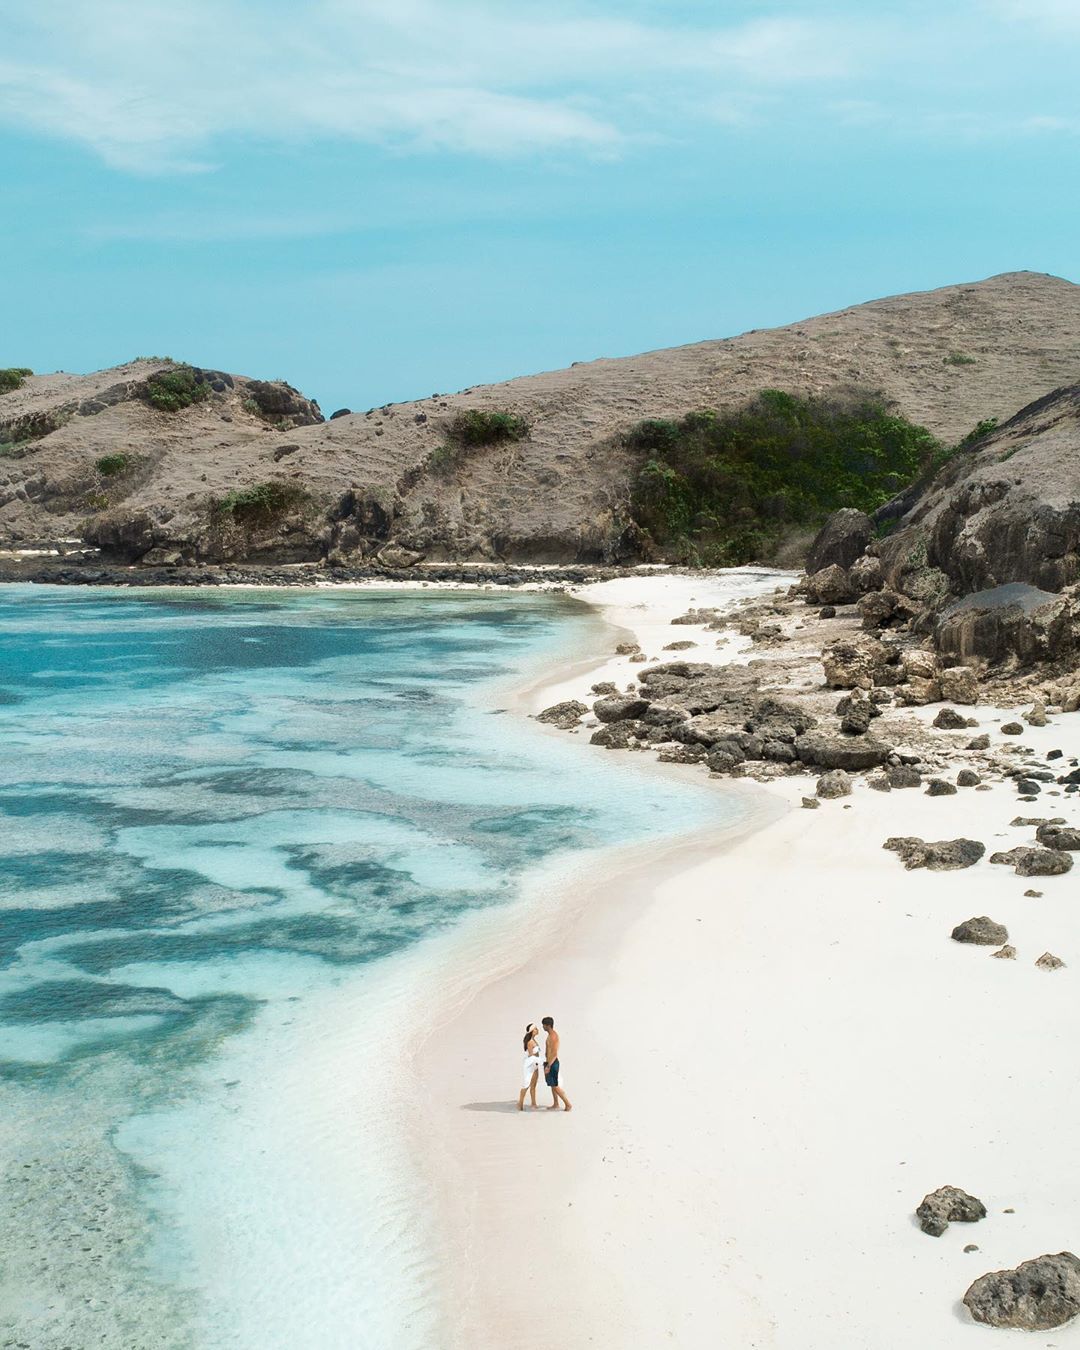 10 Tourist Attractions in Lombok that are Enchanting and Must-Visit, Hits!